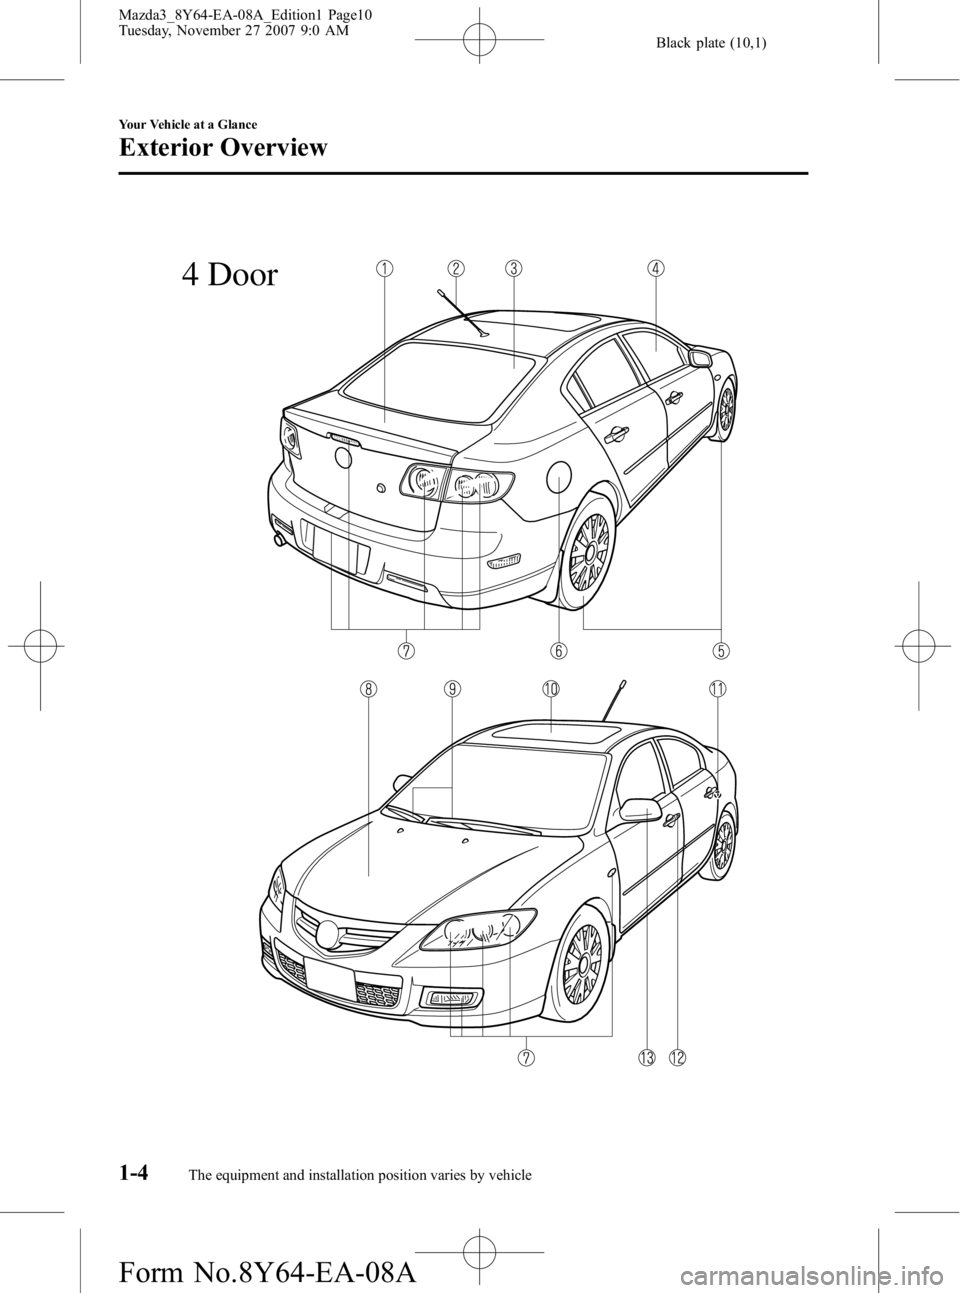 MAZDA MODEL 3 4-DOOR 2008  Owners Manual Black plate (10,1)
4 Door
1-4
Your Vehicle at a Glance
The equipment and installation position varies by vehicle
Exterior Overview
Mazda3_8Y64-EA-08A_Edition1 Page10
Tuesday, November 27 2007 9:0 AM
F